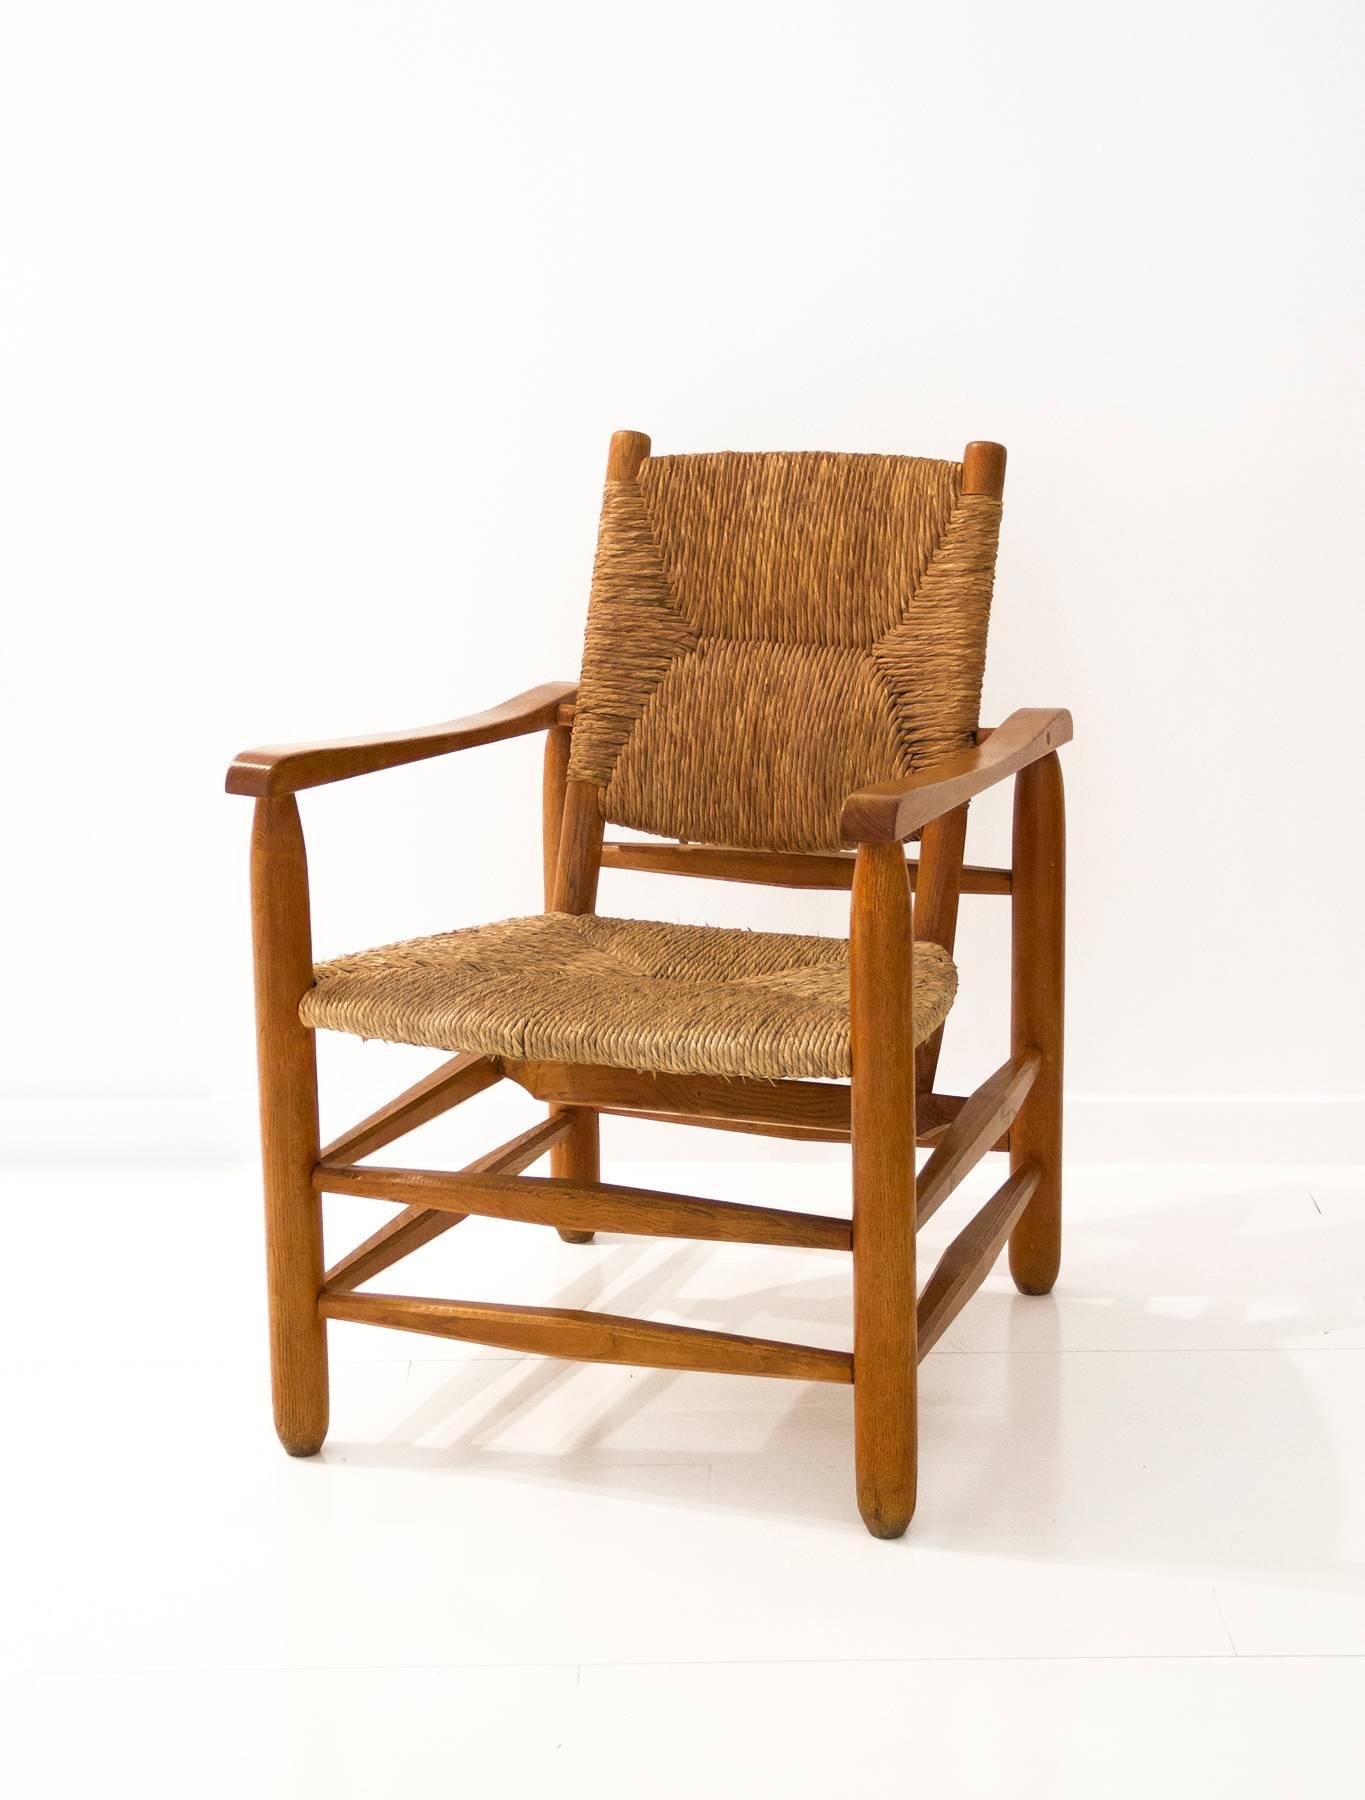 “Paillé” armchair designed by Charlotte Perriand. Solid wood structure, seat and back in straw fabric,
circa 1935, France.
 